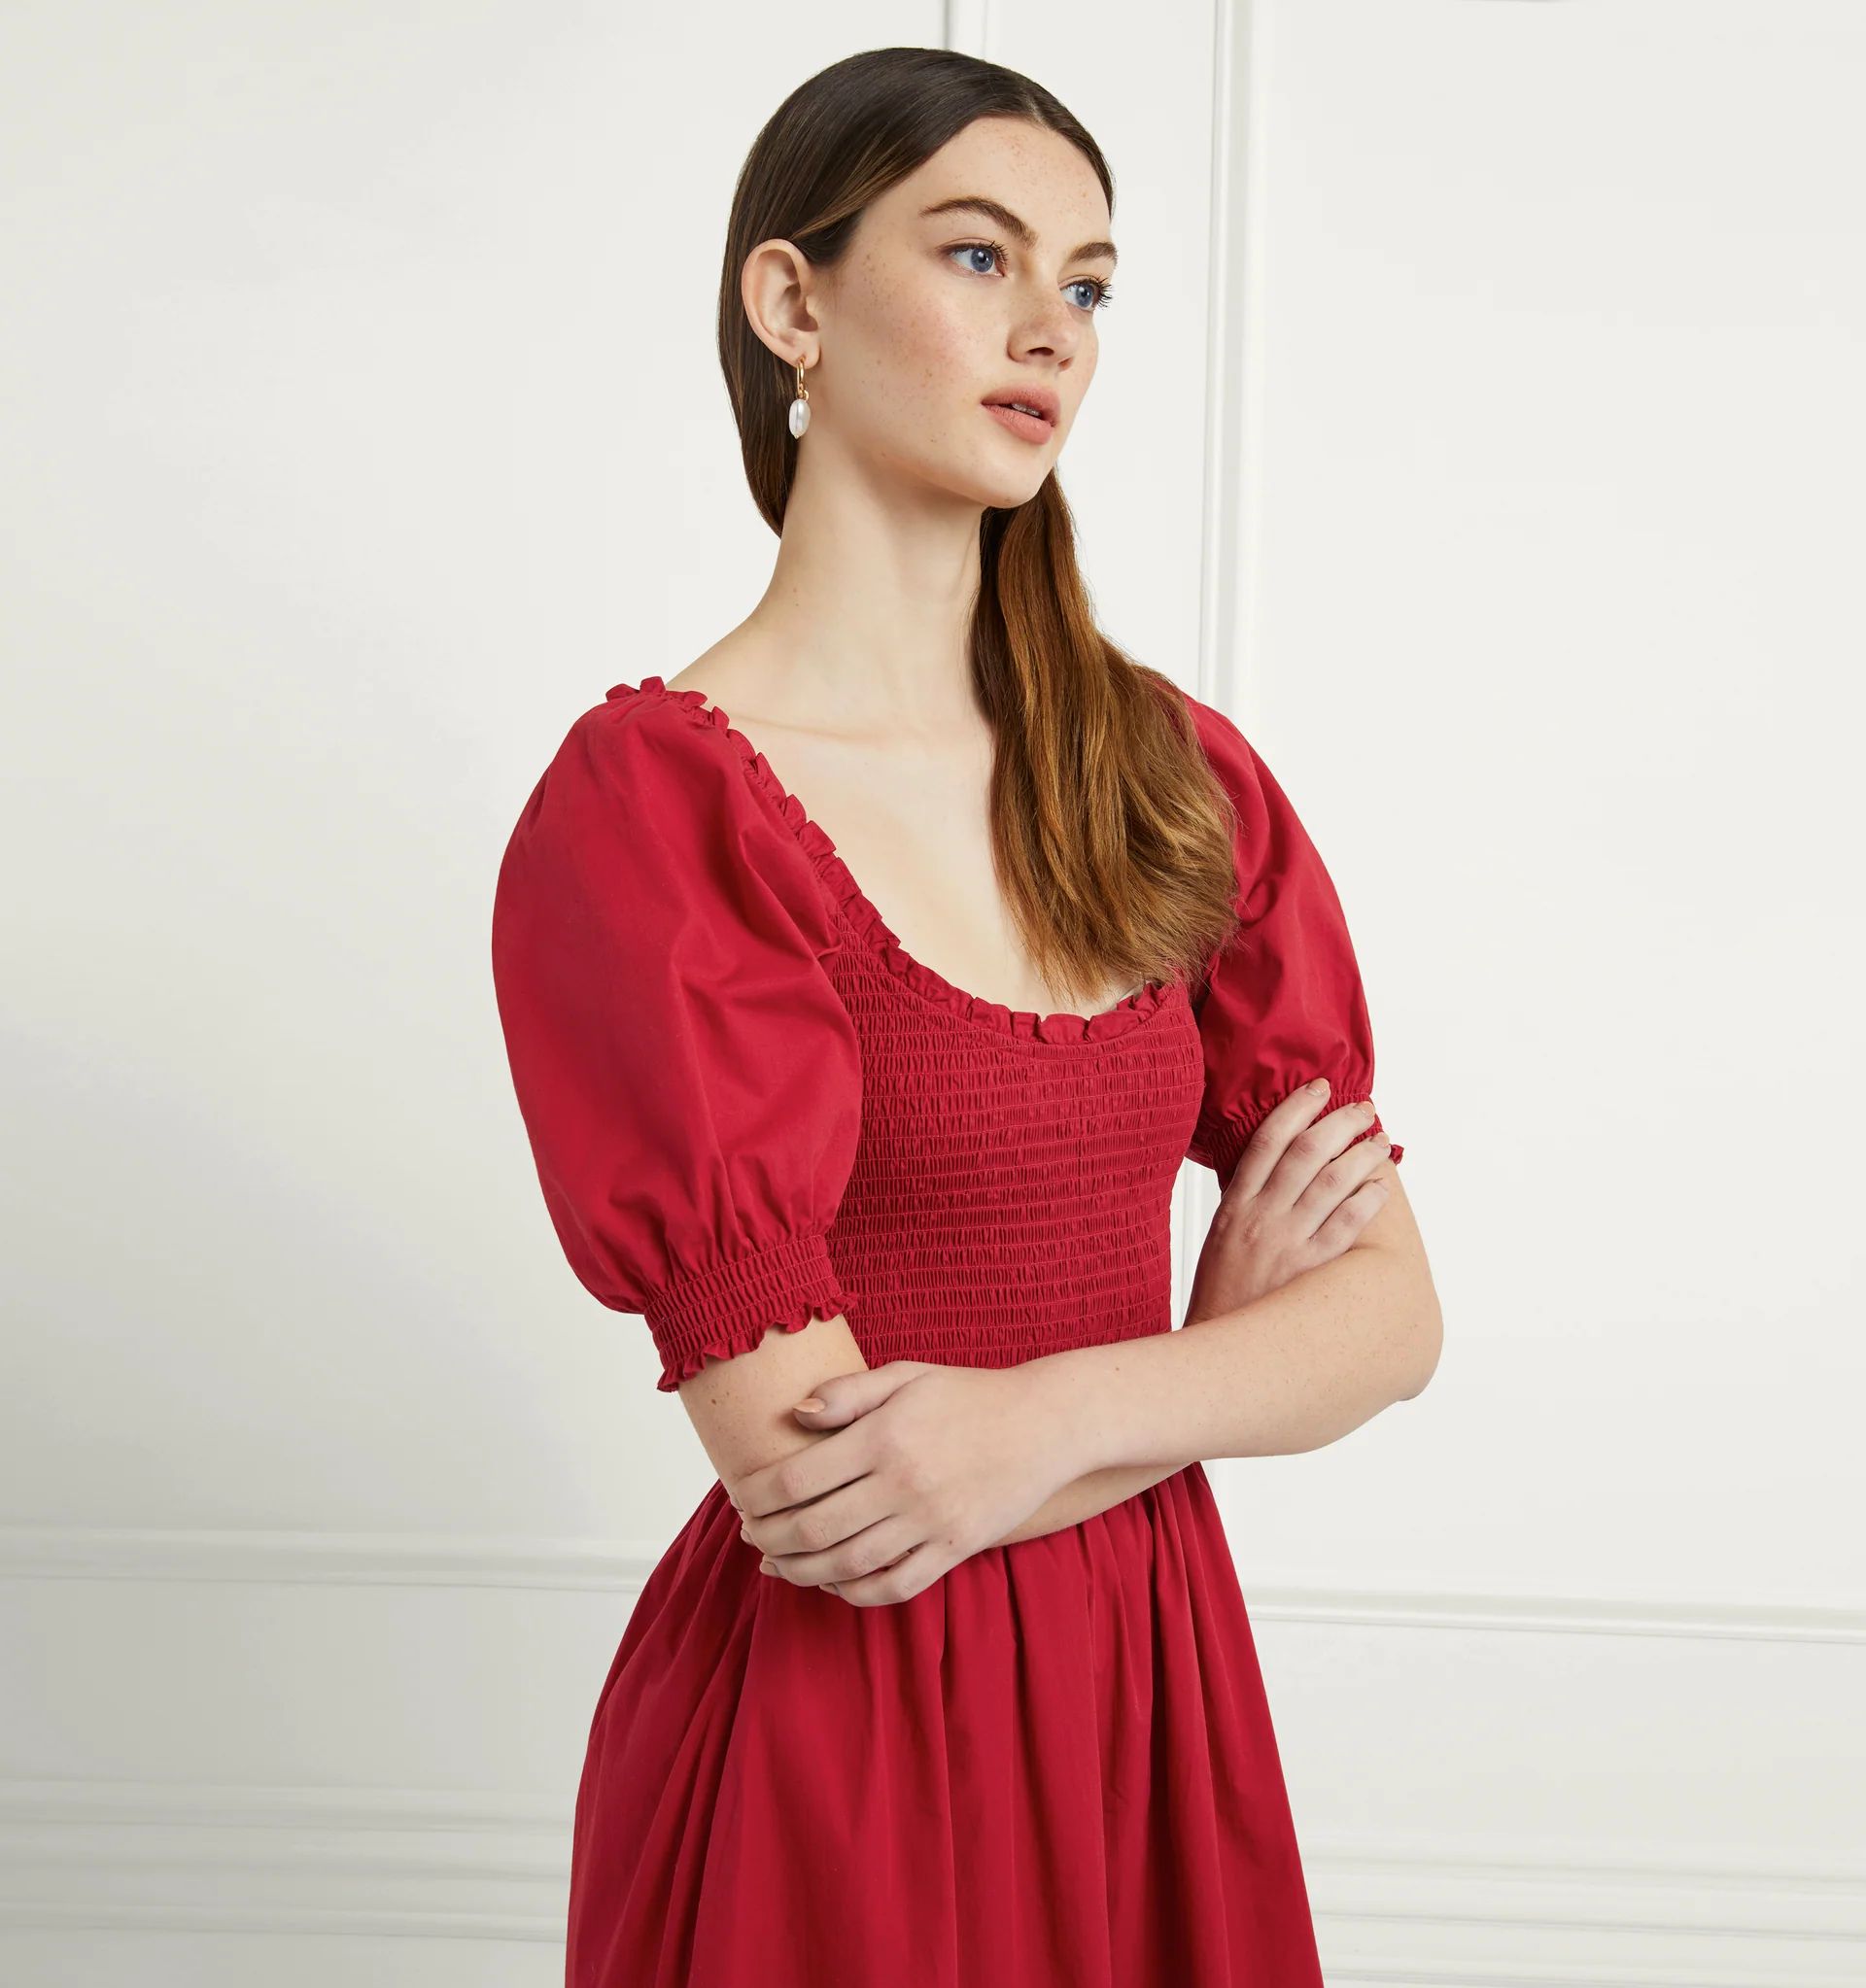 The Louisa Nap Dress | Hill House Home